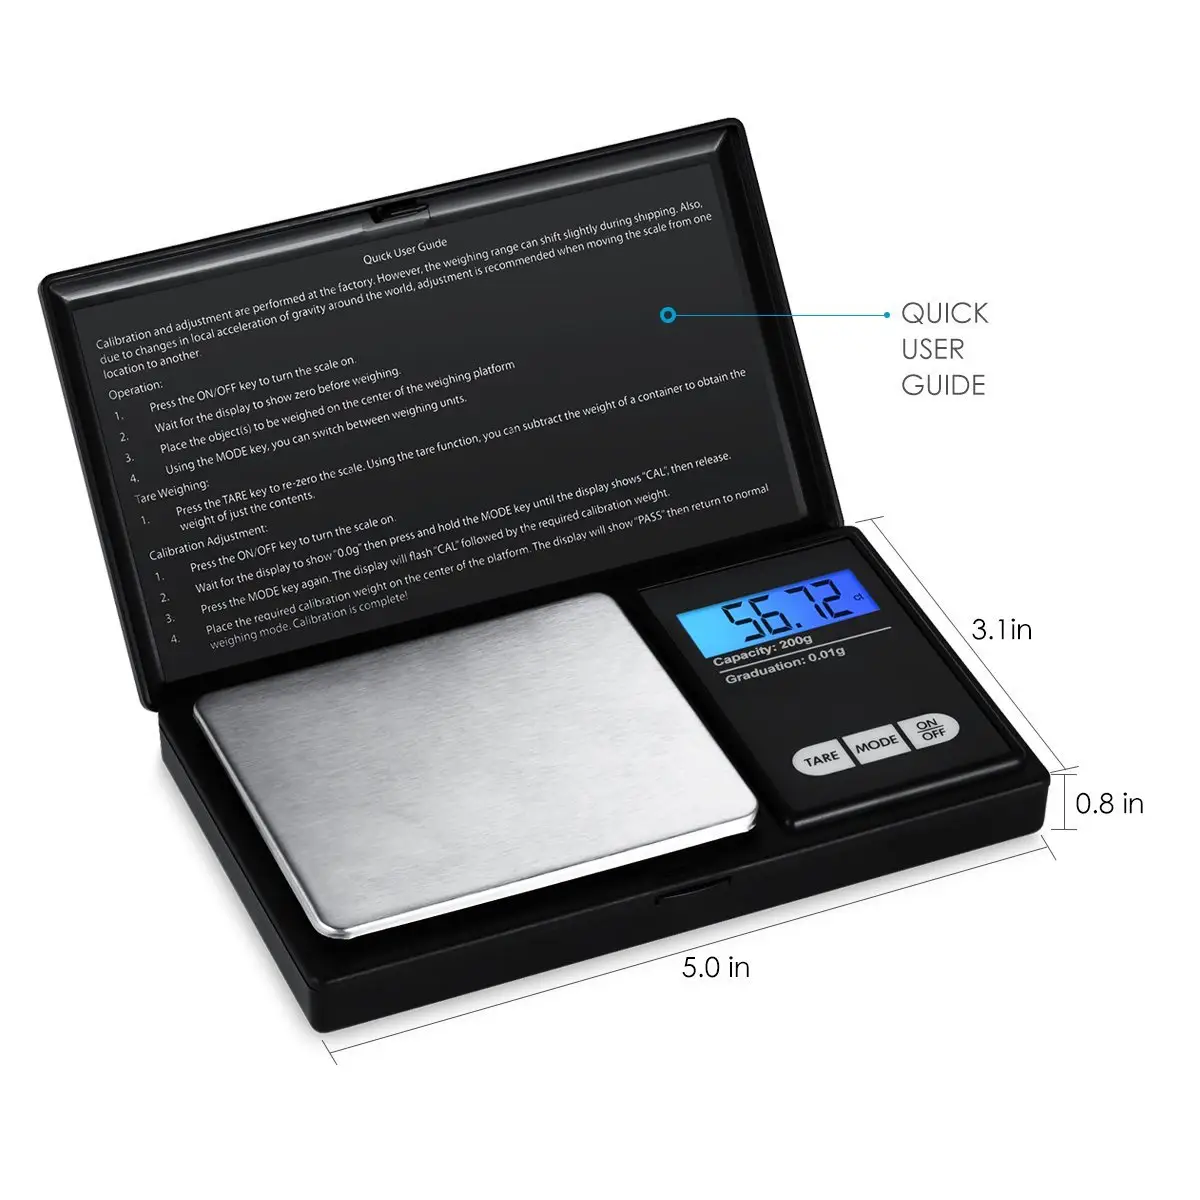 Changxie hot selling gold mini scales 0.01g 0.1g digital weight load cell pocket scale jewelry